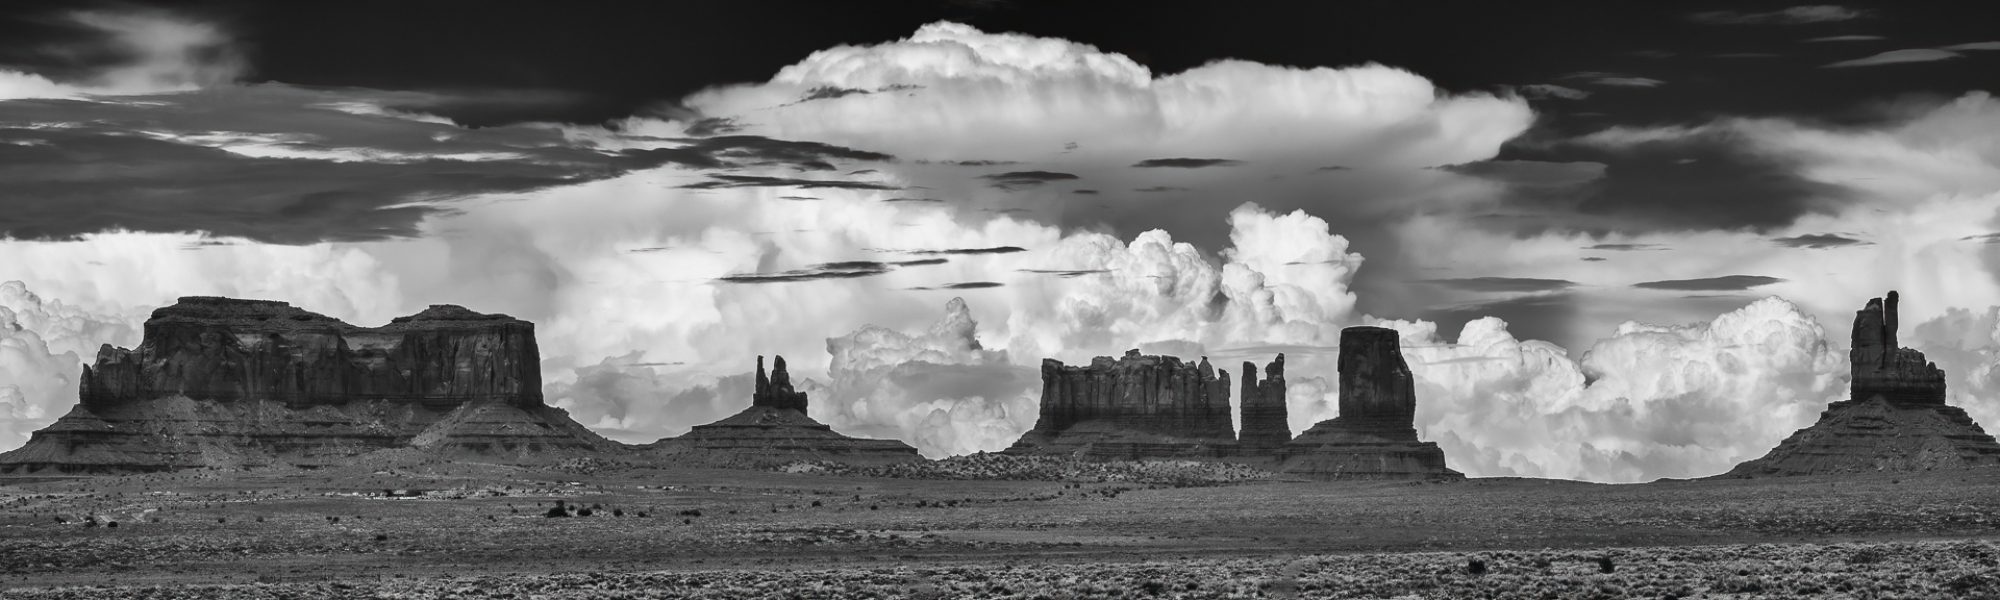 Storm Clouds Building near Monument Valley - Pat Honeycutt